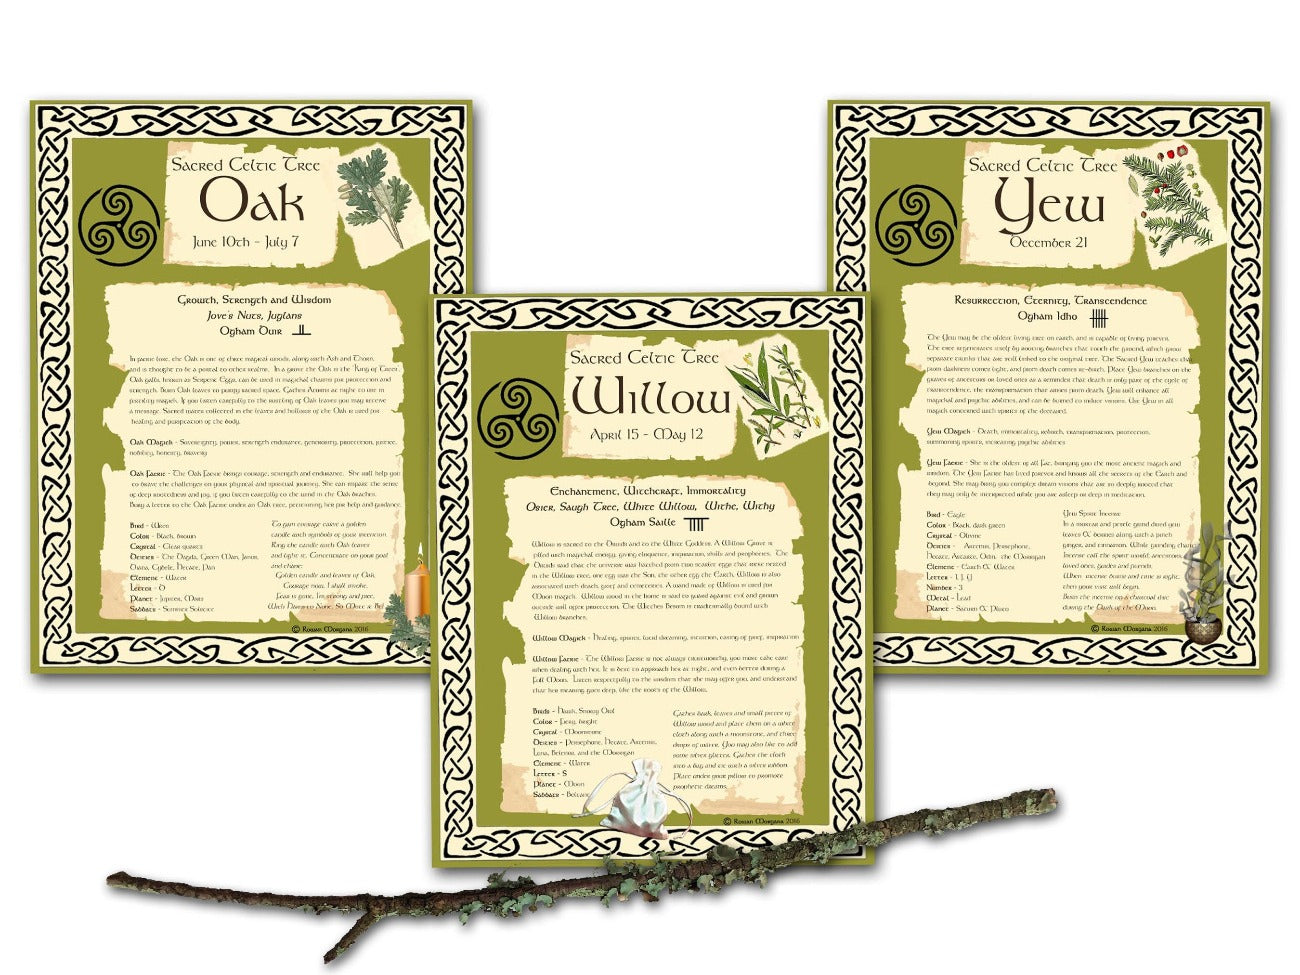 CELTIC TREES Bundle 15 Pages, Wicca Witchcraft Druid Tree Months, Celtic Tree Calendar, The Druids Calendar, Celtic Tree Month Ogham Lore- Morgana Magick Spell